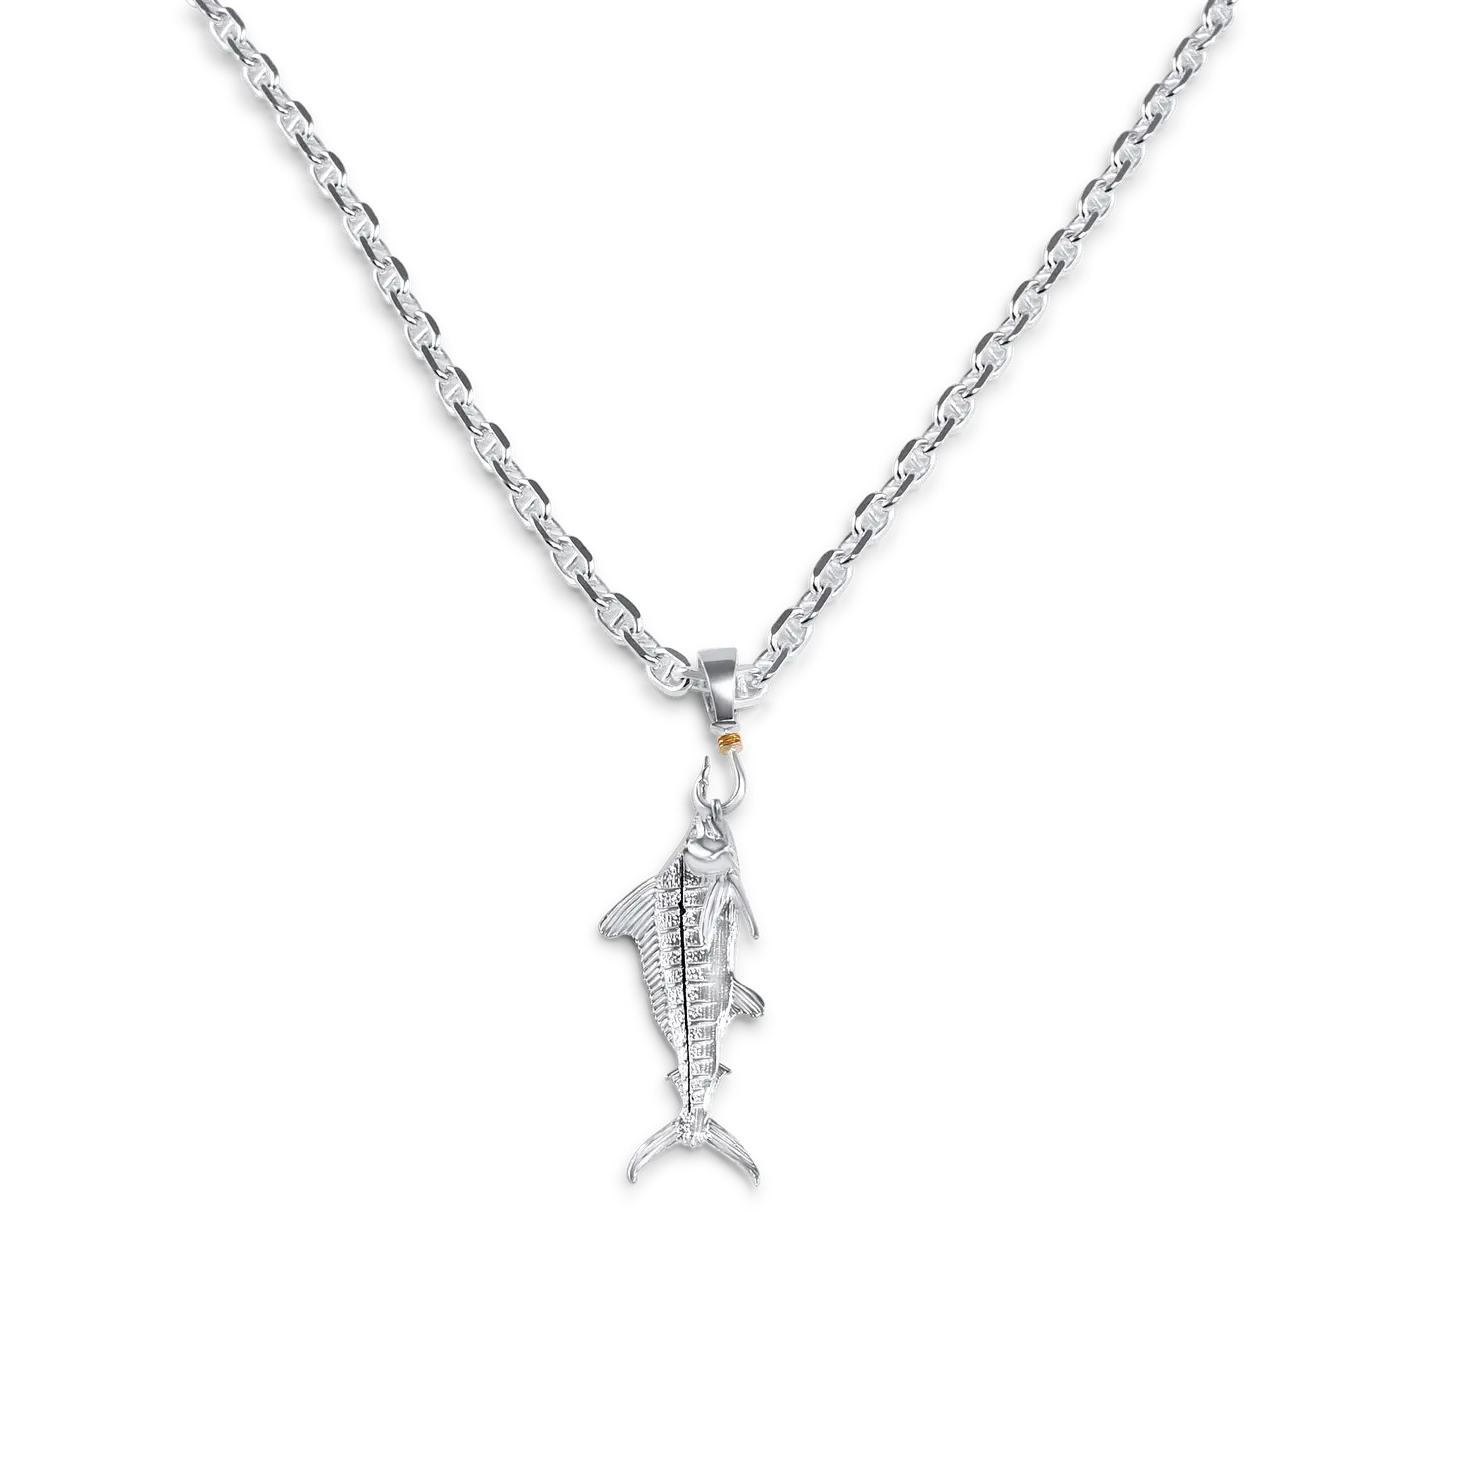 White Marlin Necklace - Sterling Silver Chain Included